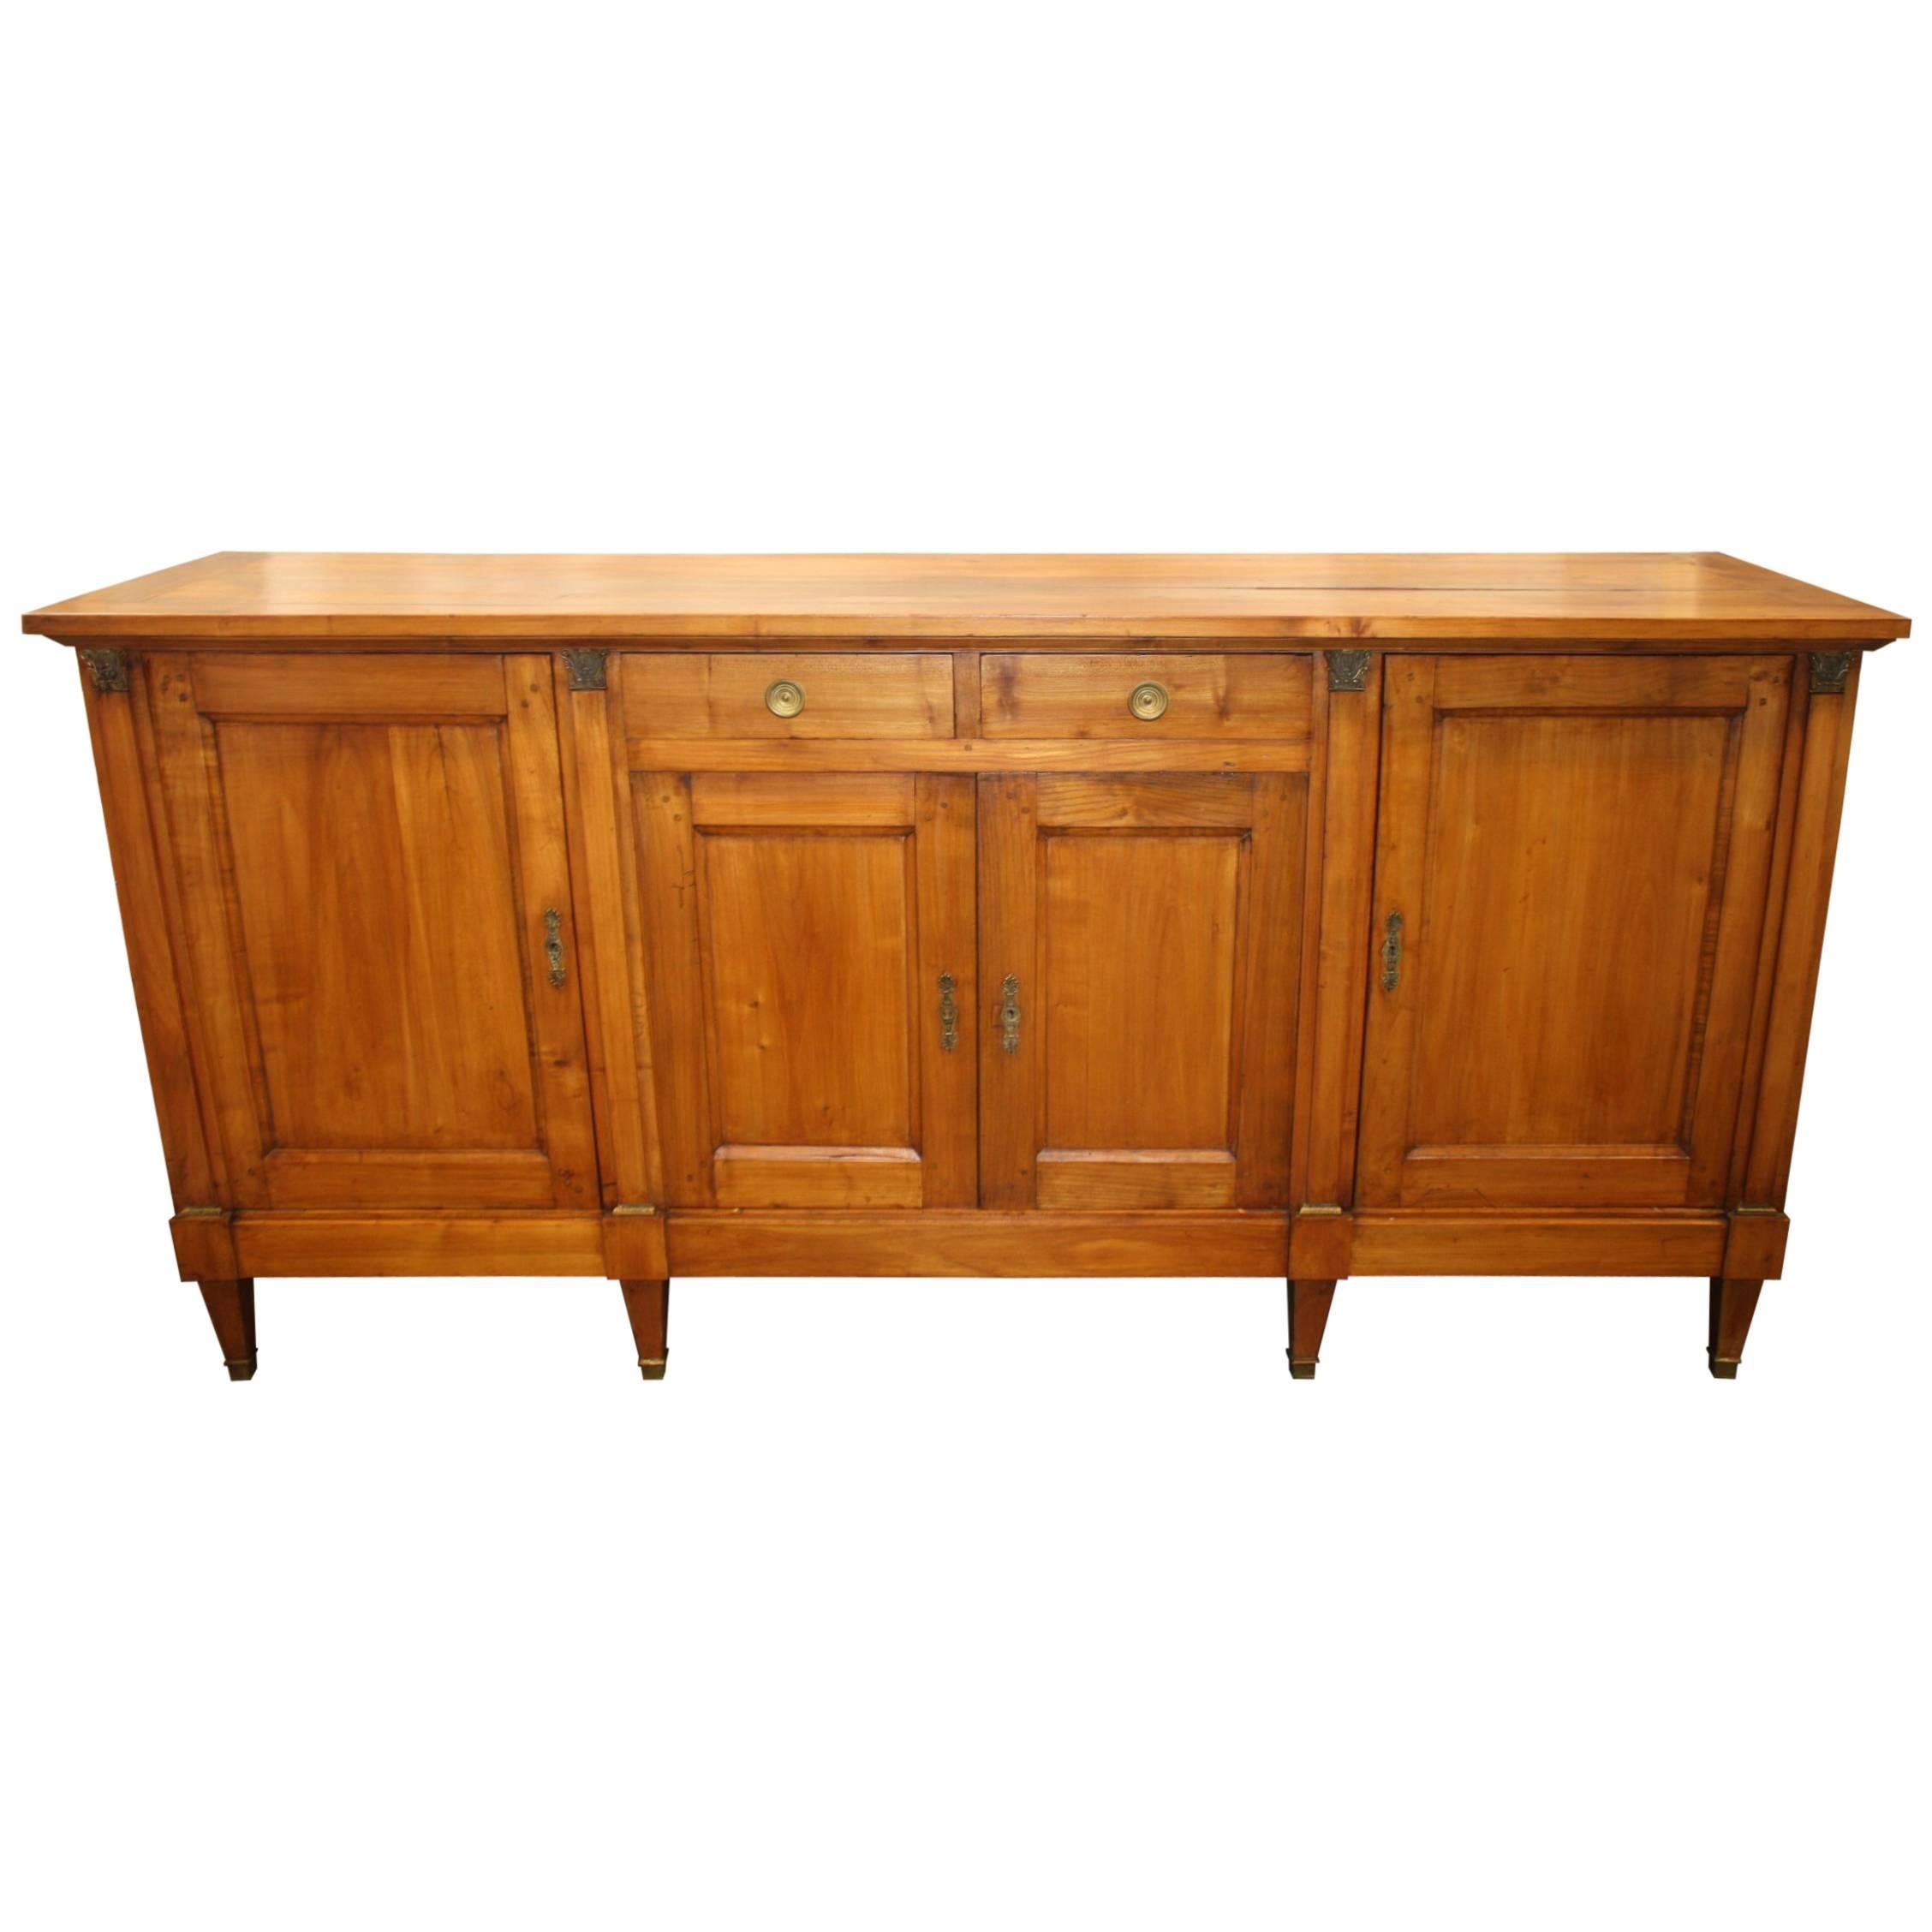 19th Century French Directoire Style Sideboard